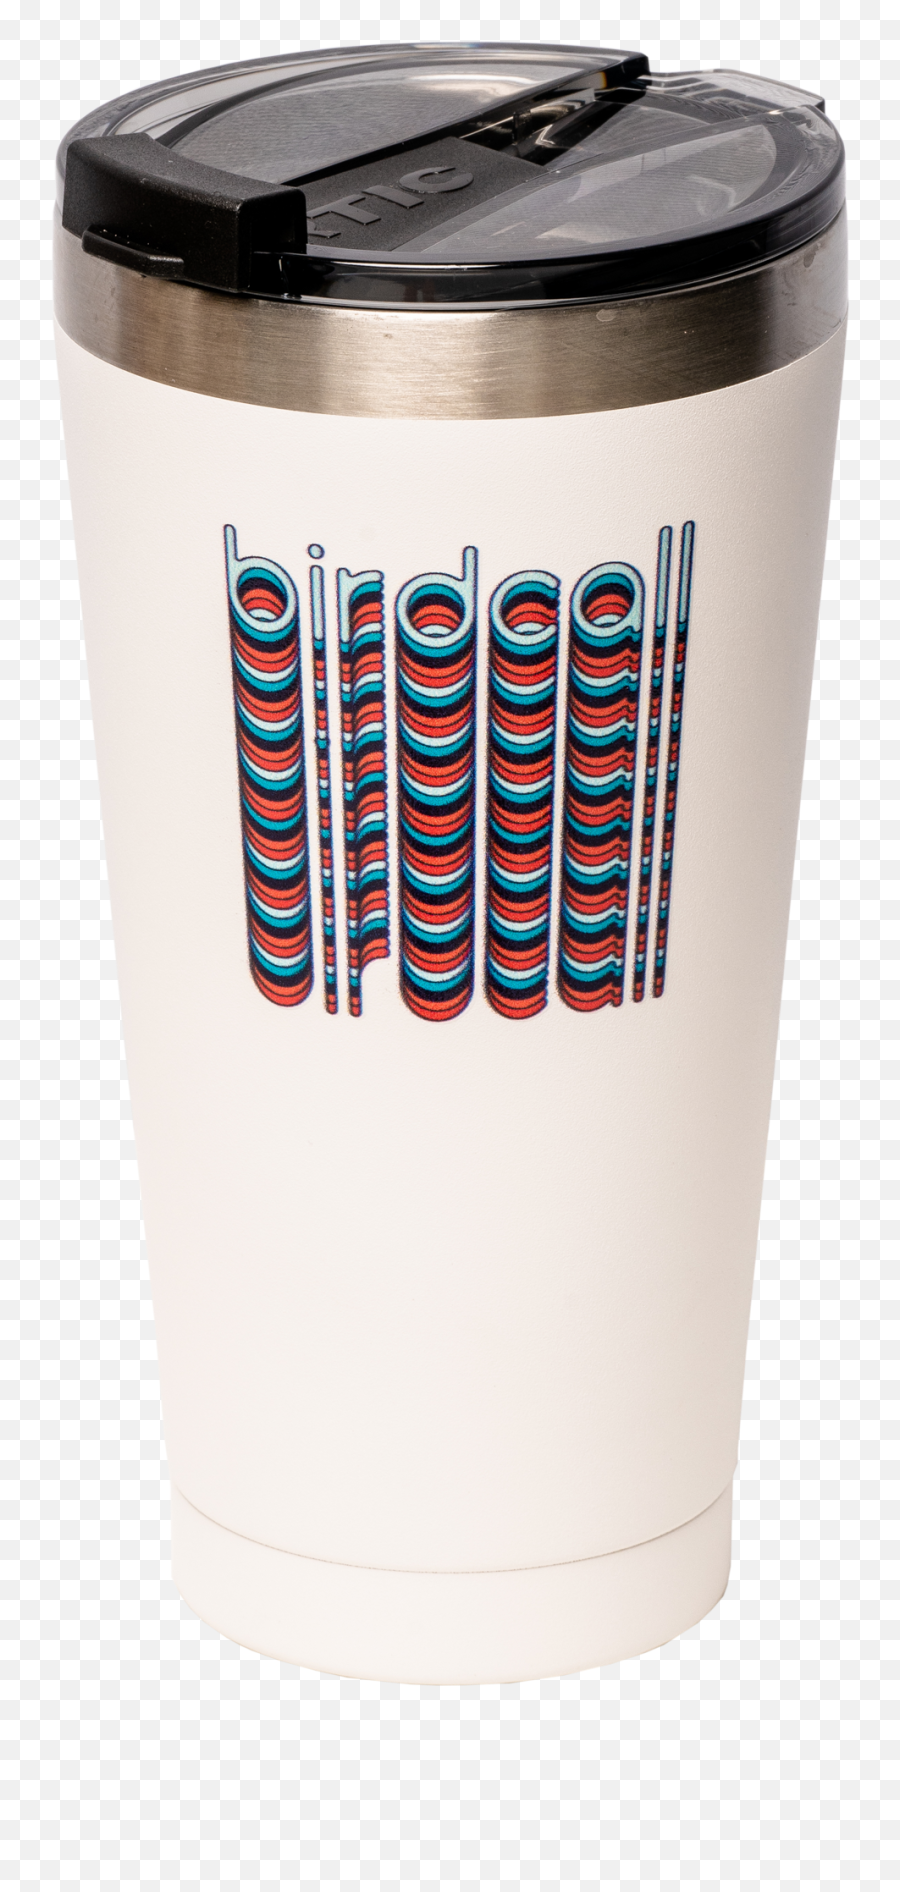 Birdcall Merch Tumbler - Waste Container Png,Starbucks Icon Mugs